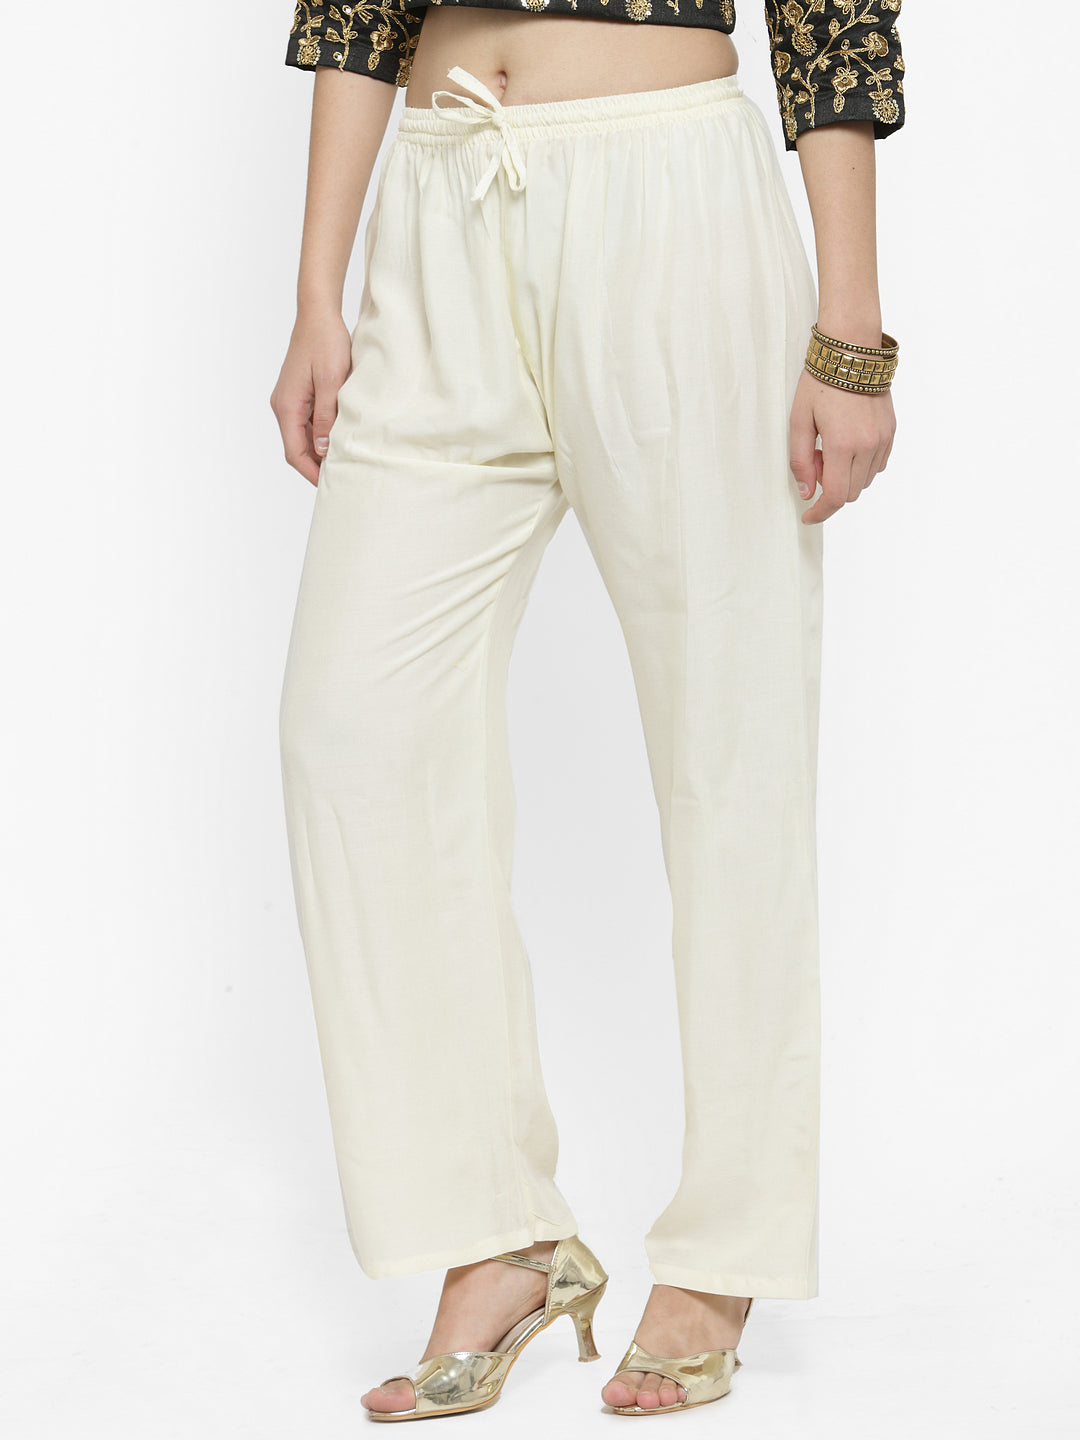 Clora Off-White Solid Rayon Palazzo